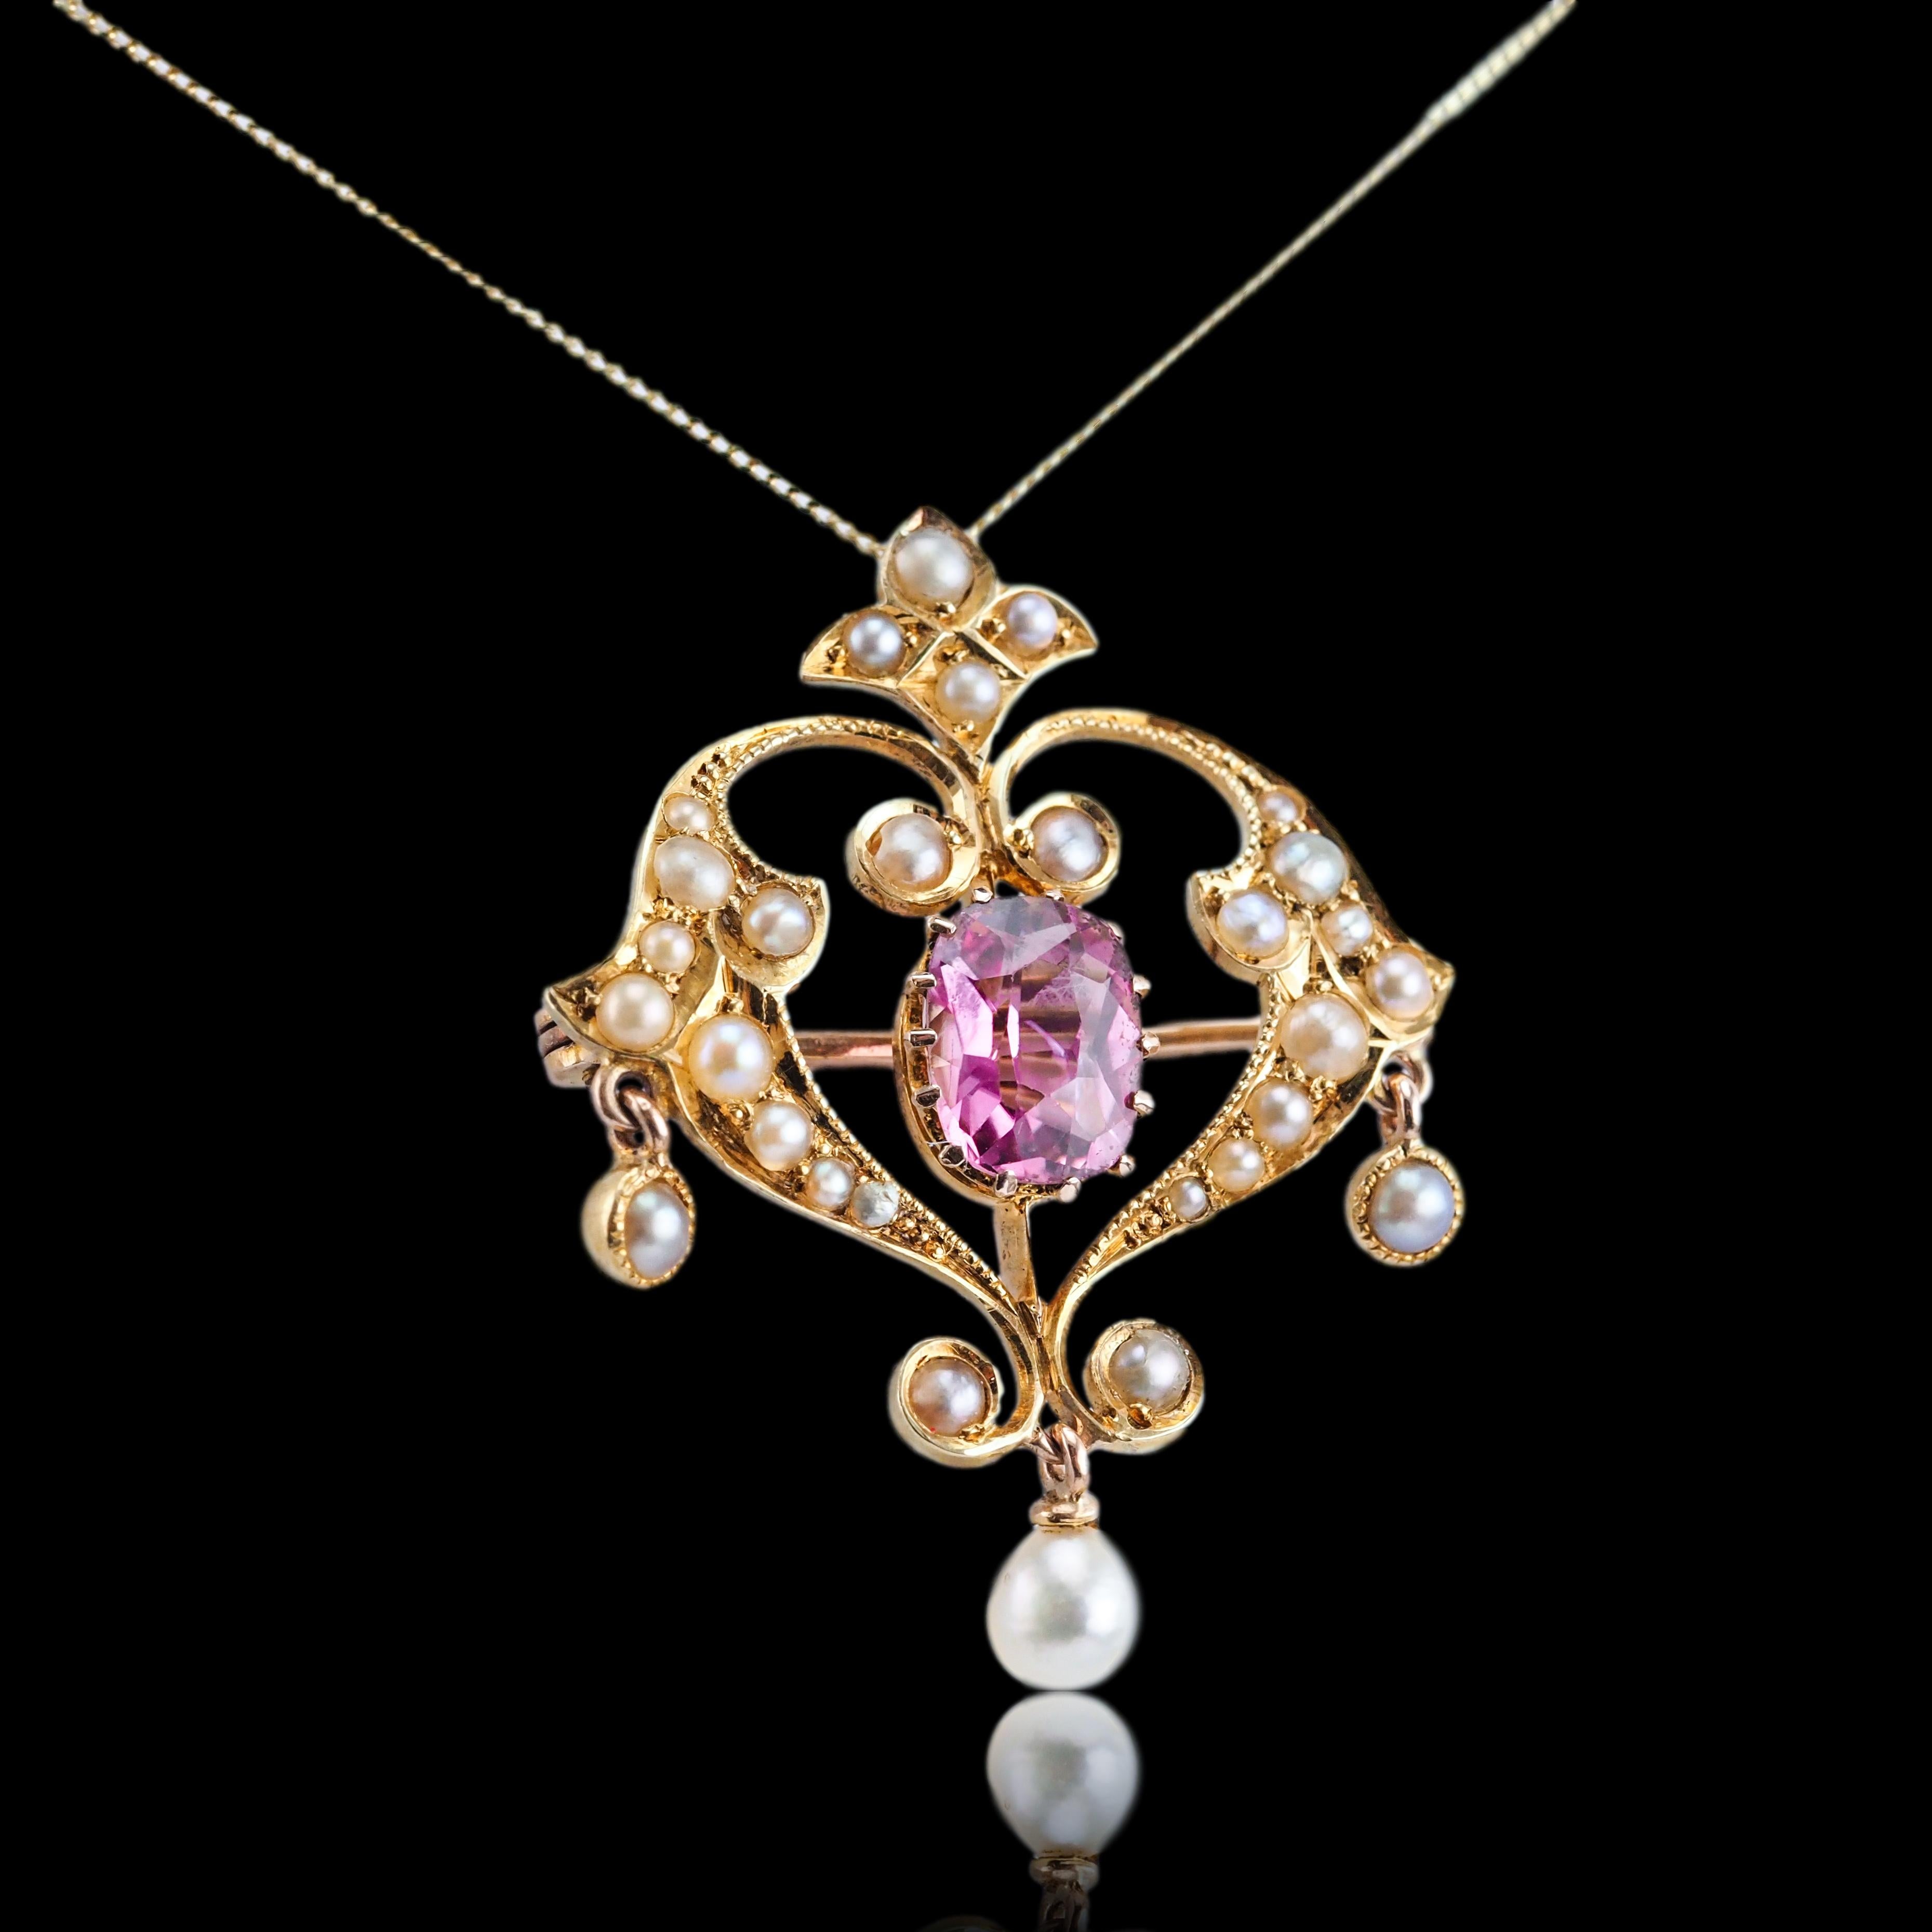 Antique Edwardian Pink Tourmaline & Seed Pearl 15K Gold Pendant Necklace - c.19 For Sale 7